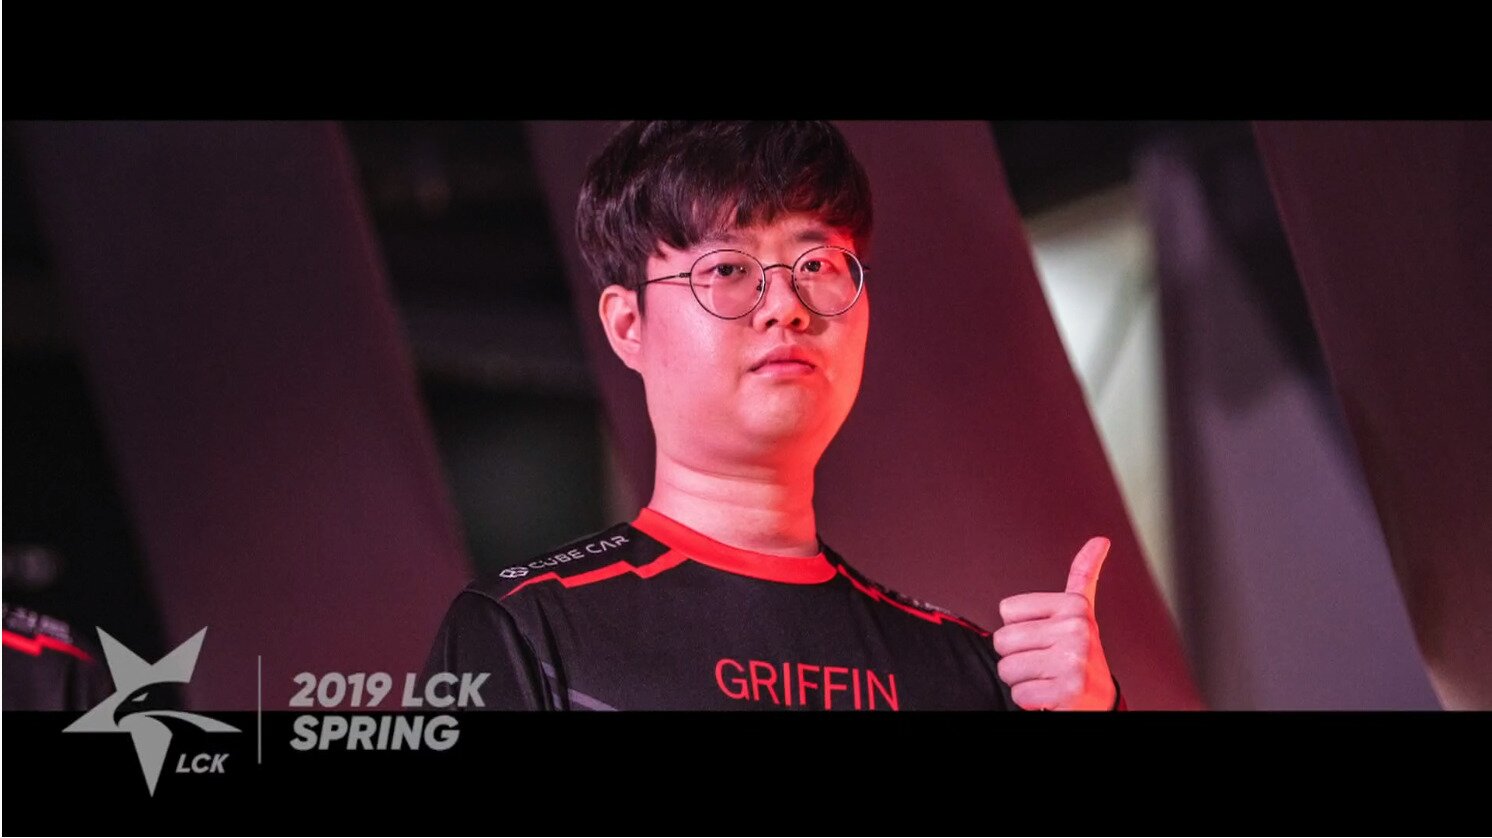 Though still in first-place, Griffin are looking less dominant atop the LCK standings